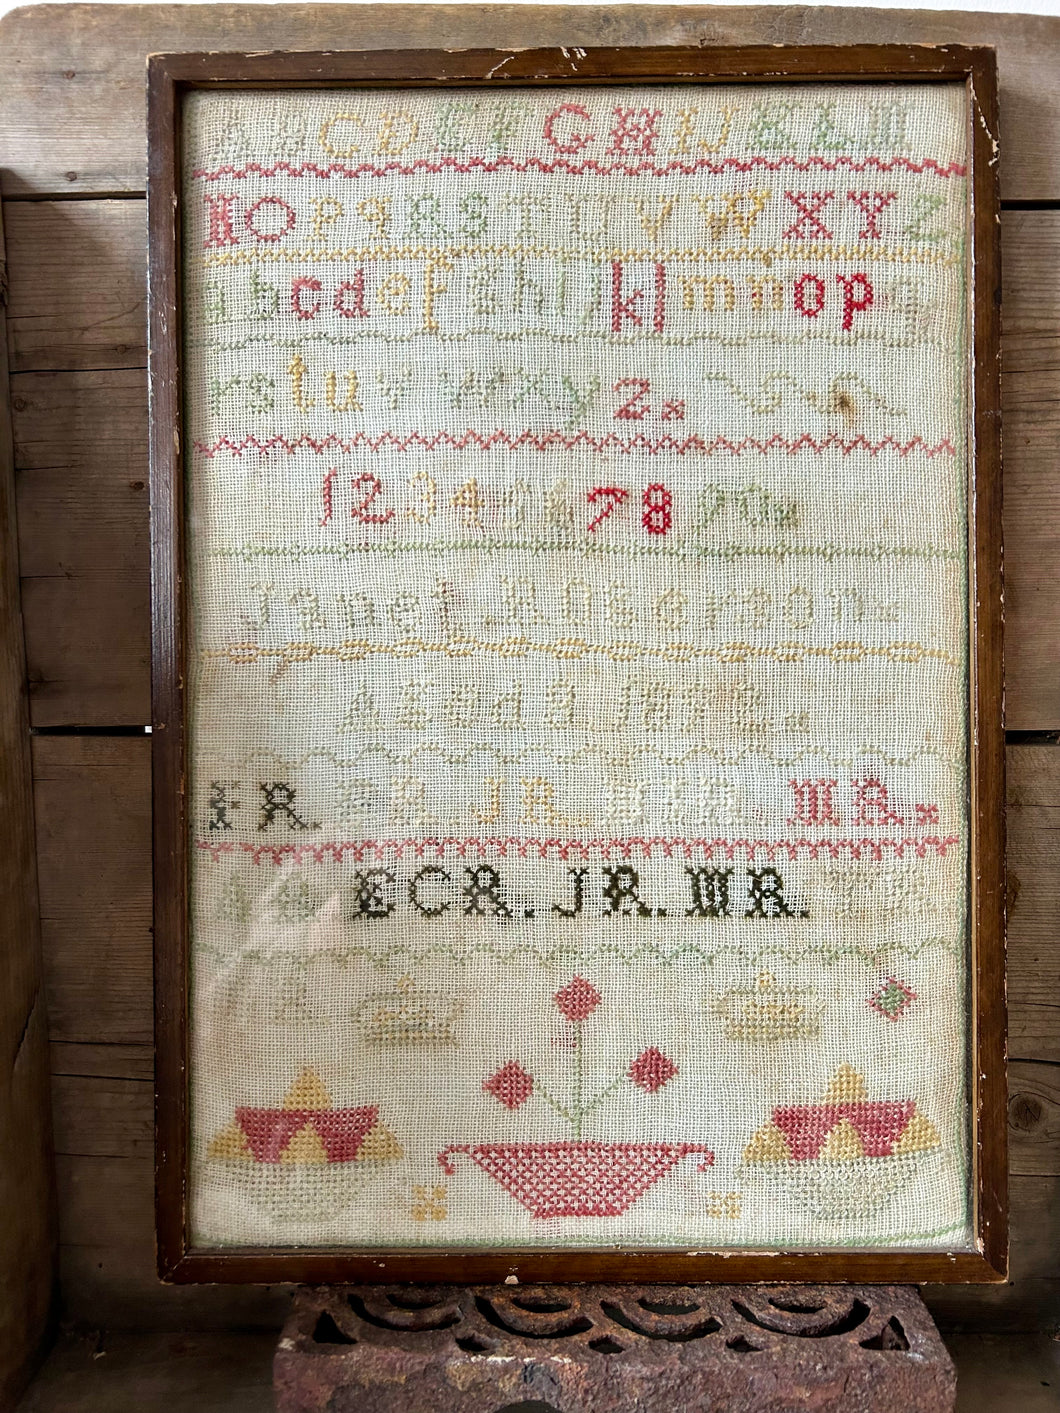 Antique Embroidery Sampler Dated 1878